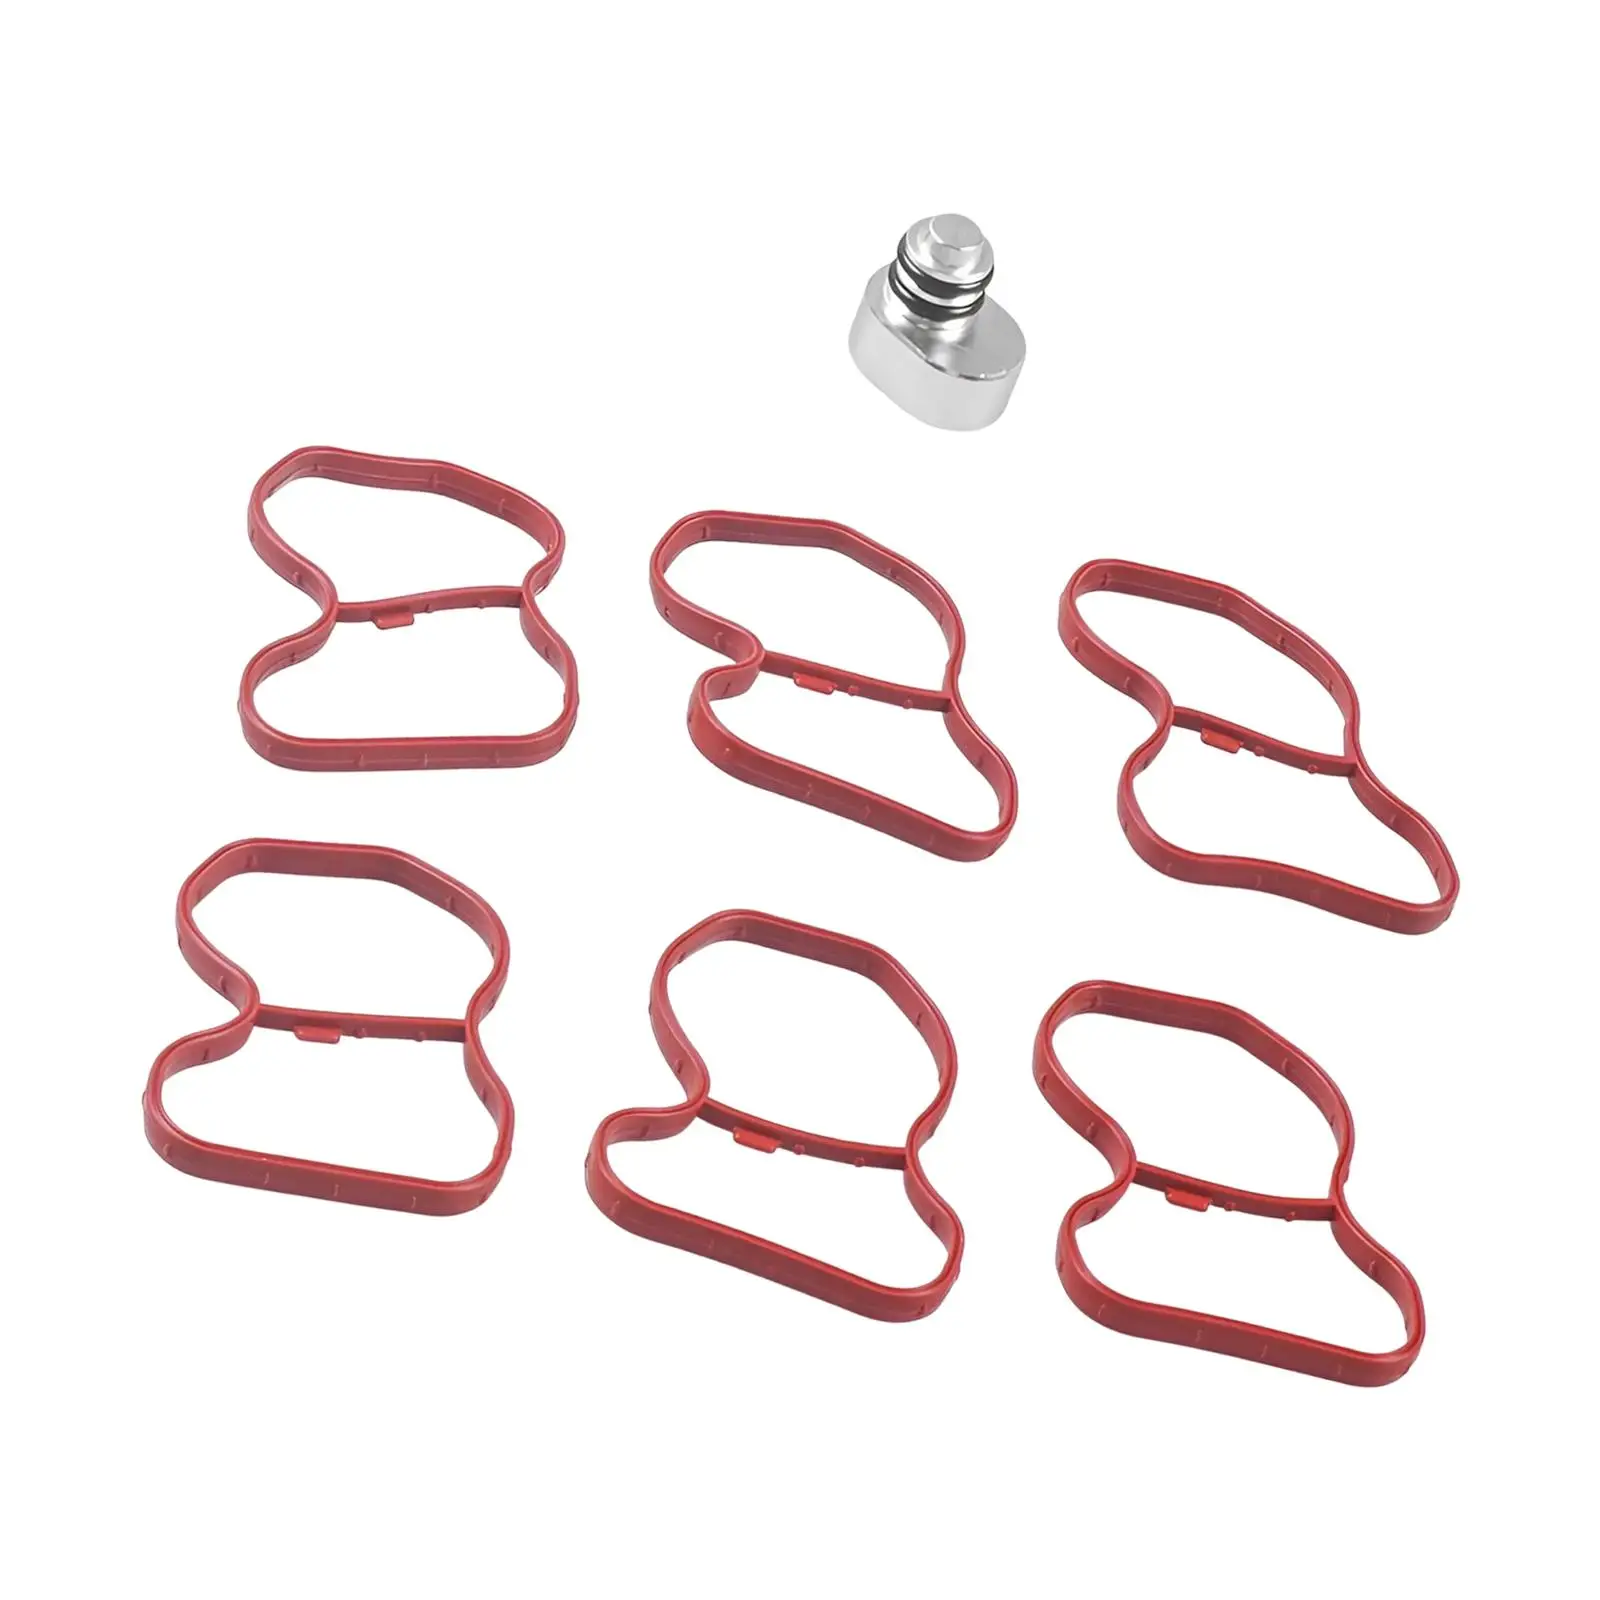 Swirl Flap Plug Kits with Gaskets 11618511363 714123100 Fit for N57 N57S